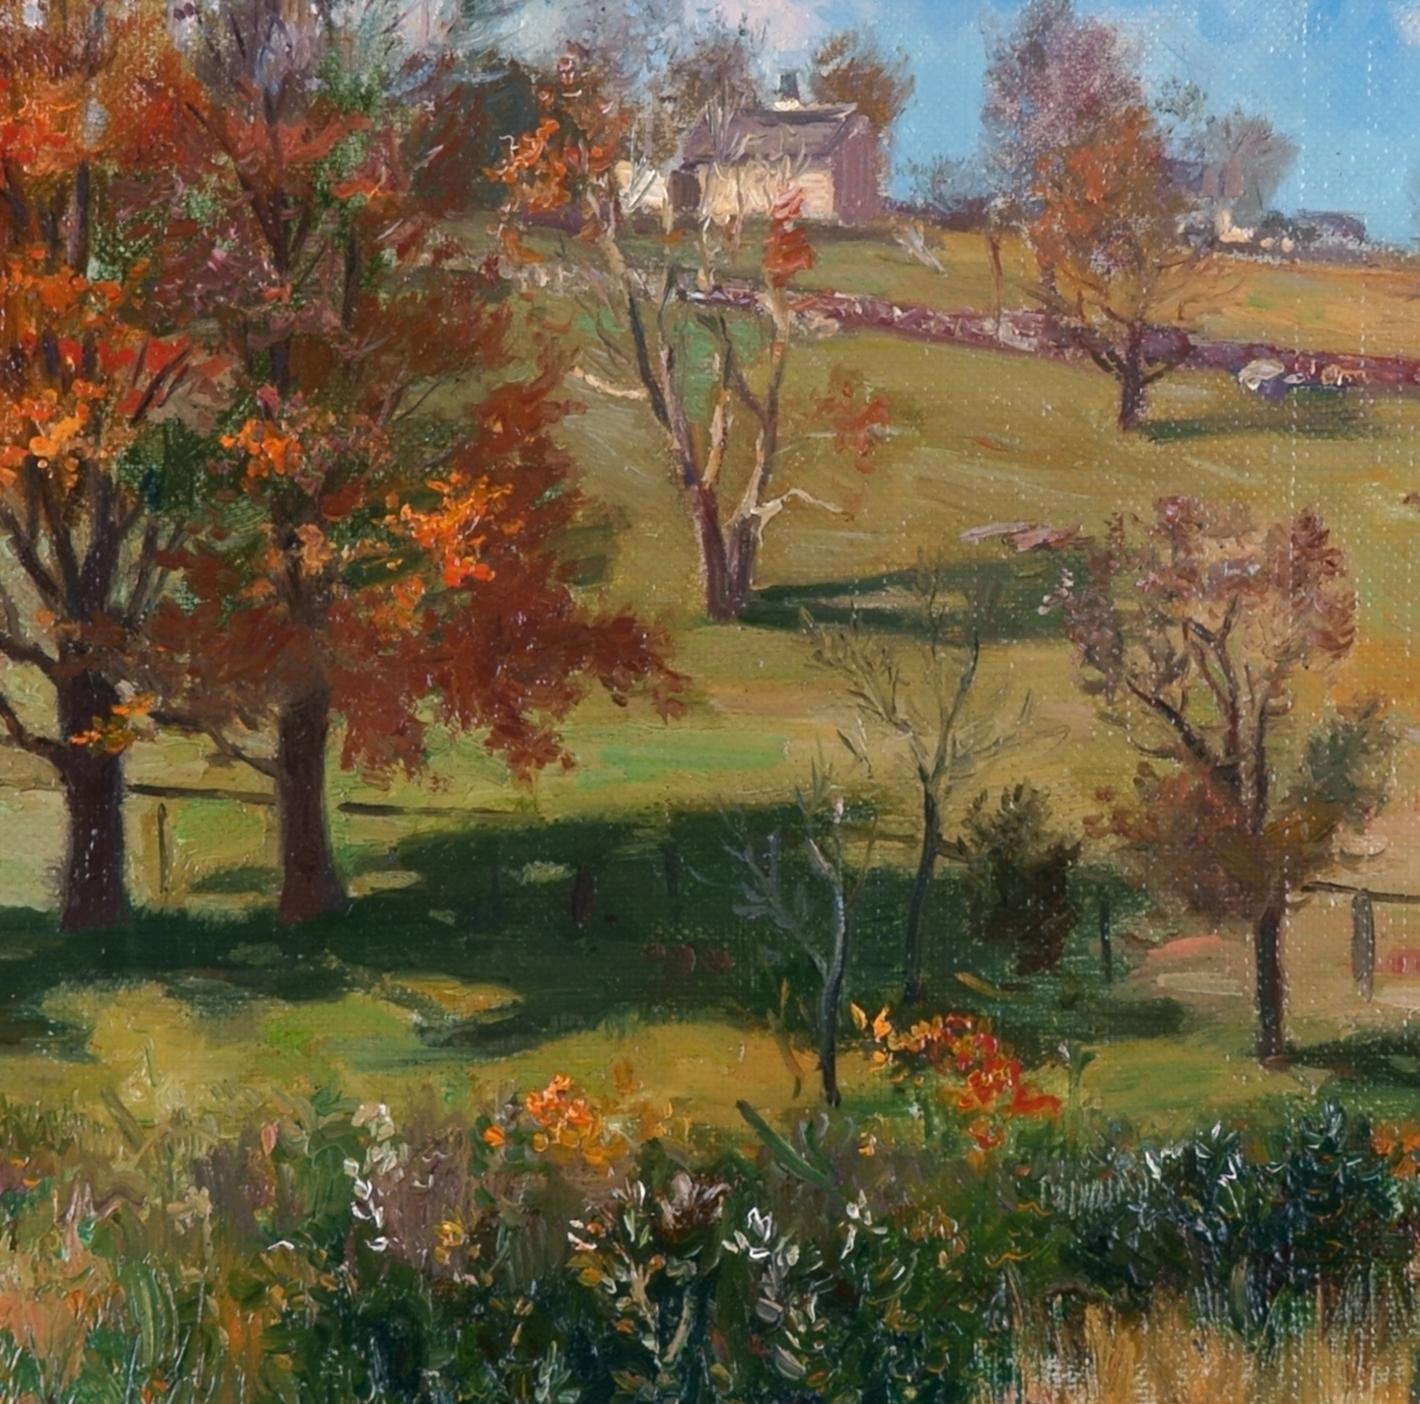 Autumn Landscape in Sunlight - Indian Summer - - Painting by Frederick Vezin